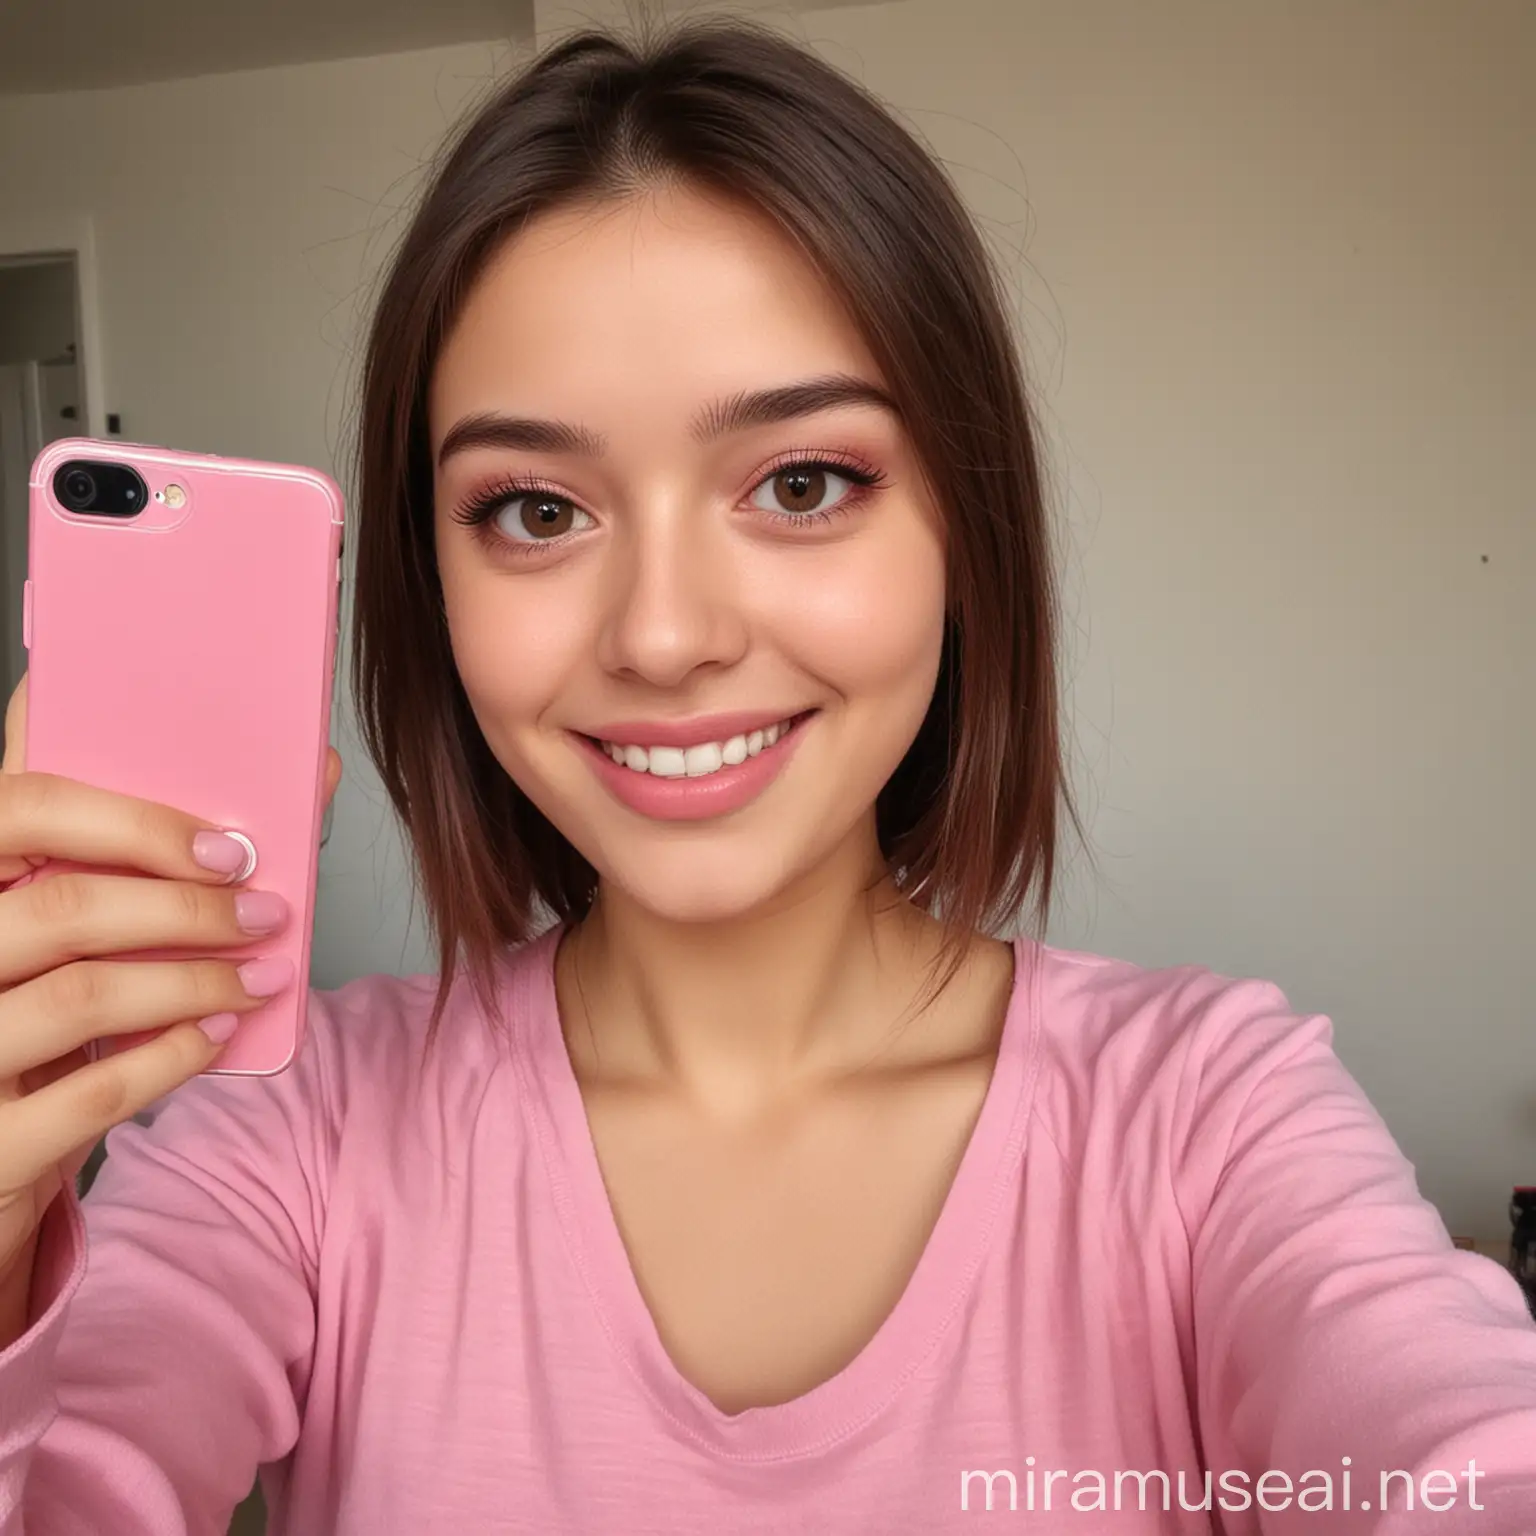 wearing pink, a foreign girl poses happily for a selfie, showing the entire phone